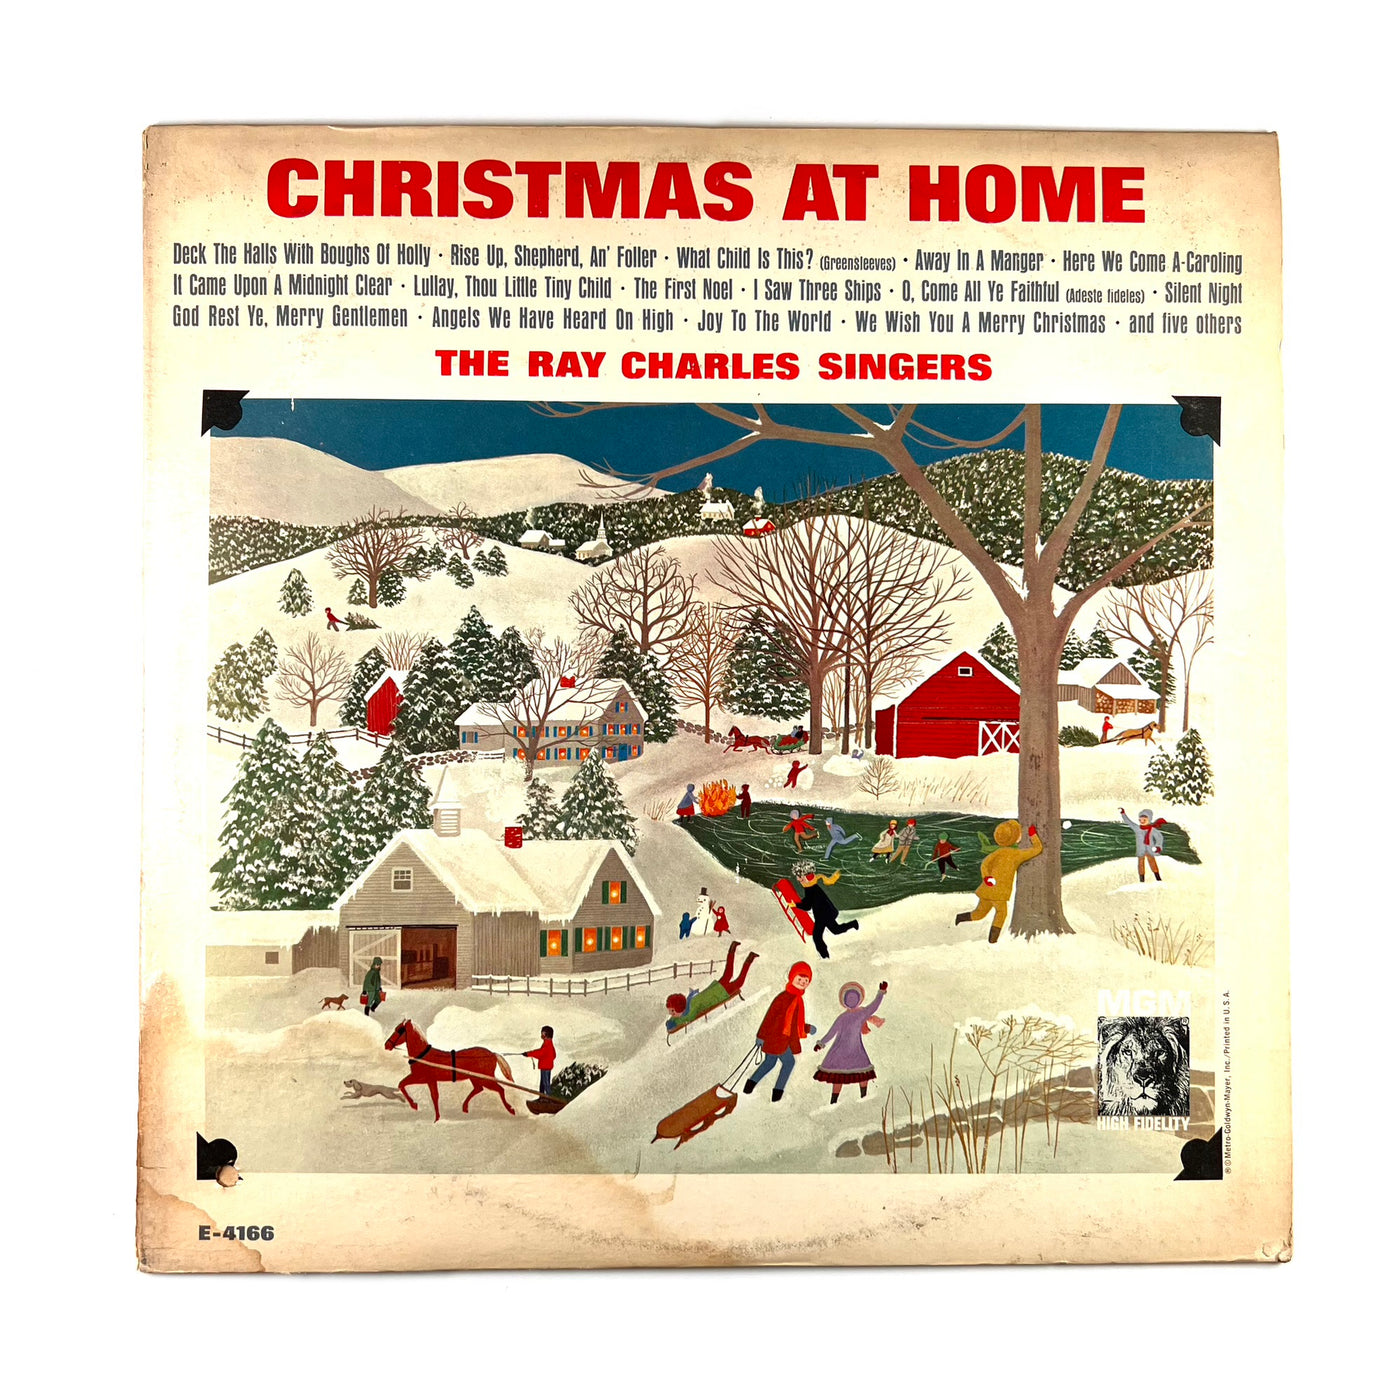 The Ray Charles Singers - Christmas At Home